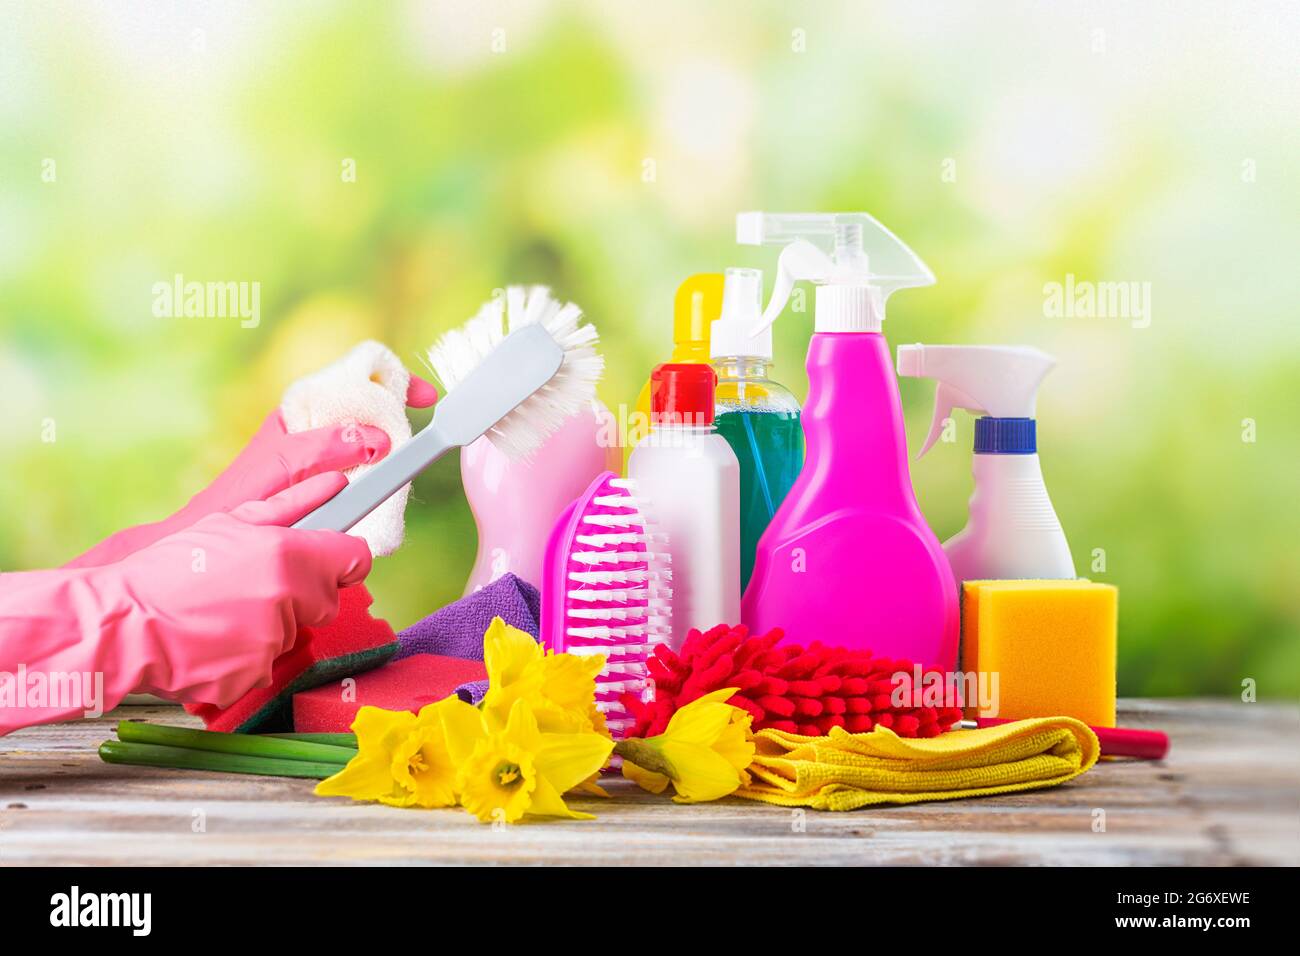 https://c8.alamy.com/comp/2G6XEWE/spring-cleaning-office-or-house-concept-different-cleaning-supplies-over-blurred-spring-background-among-floating-soap-bubbles-copy-space-2G6XEWE.jpg